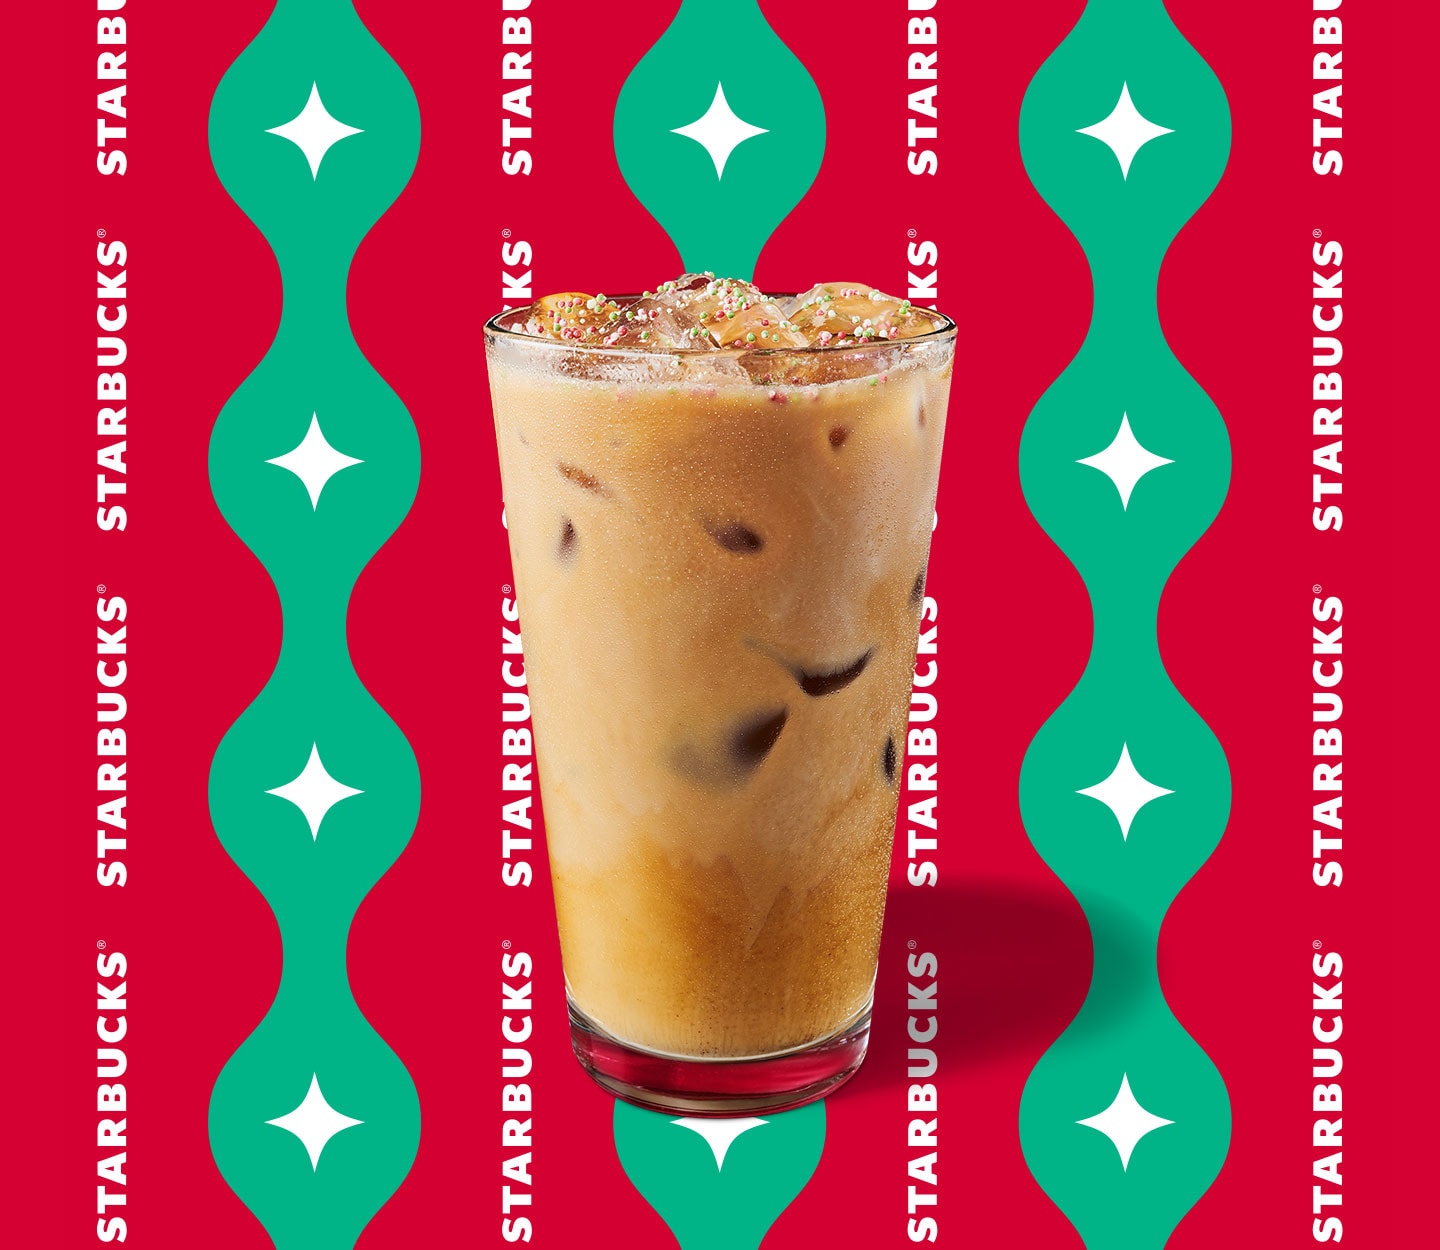 Creamy iced espresso drink with red and green sprinkles in a tall glass.